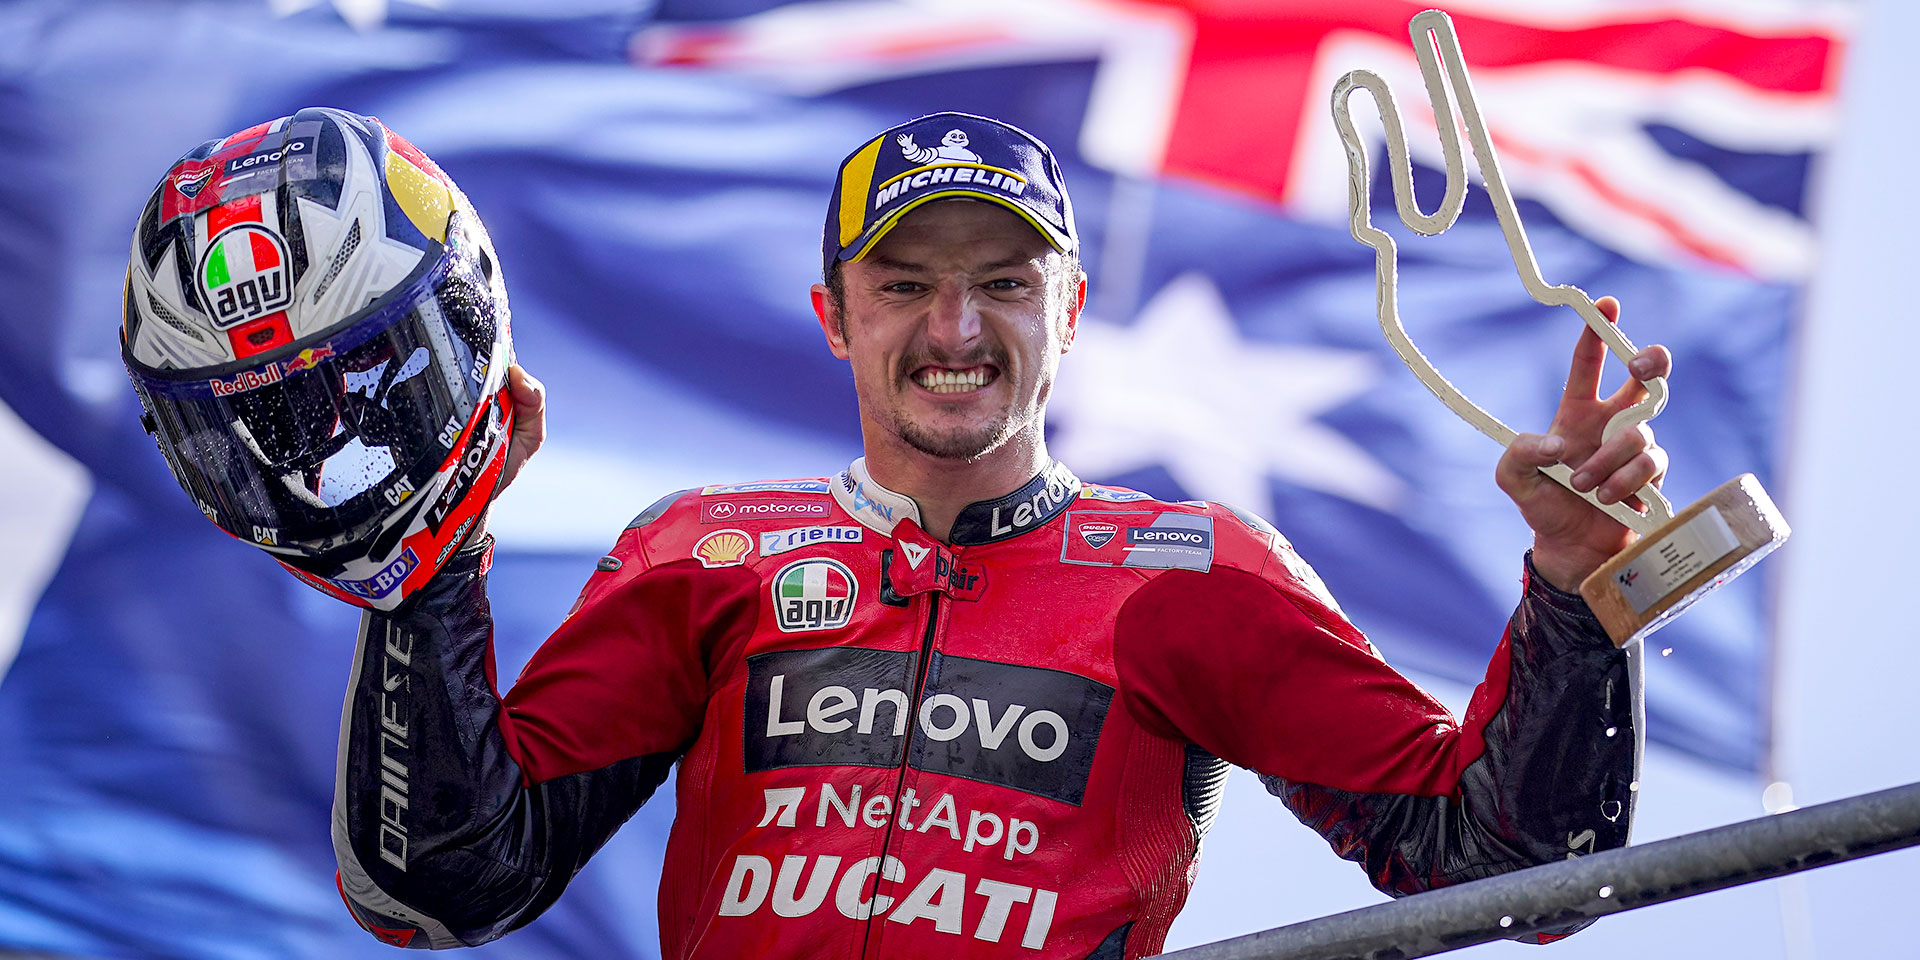 Jack Miller and Ducati to part ways at the end of the 2022 season